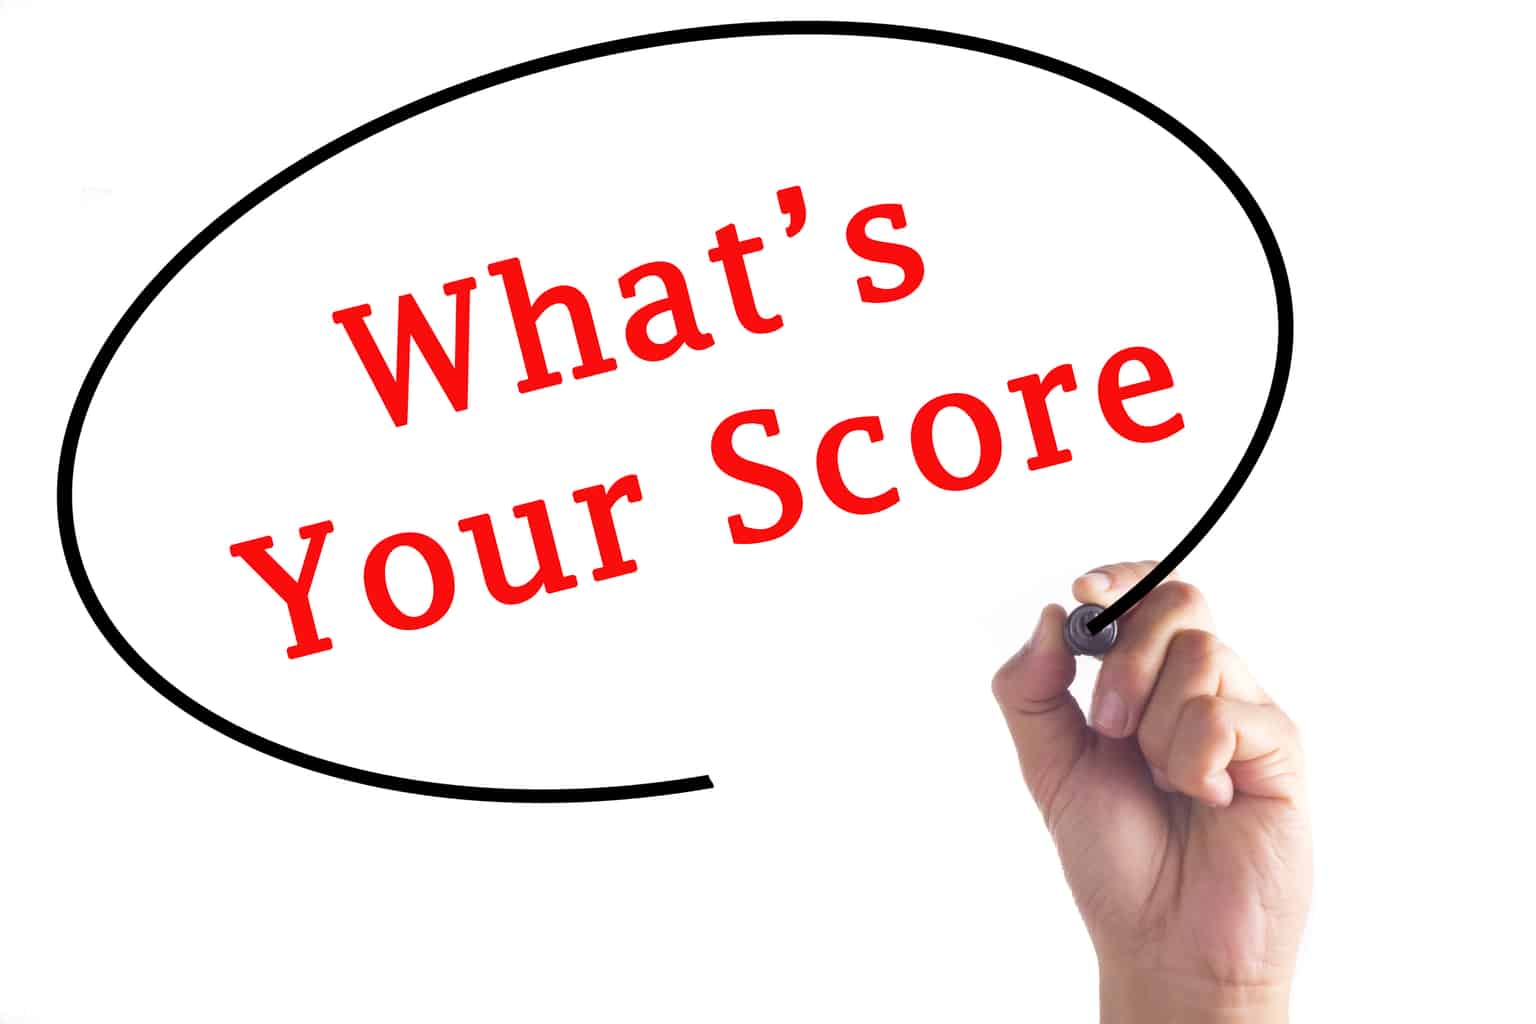 See inside: what’s your MHI score?